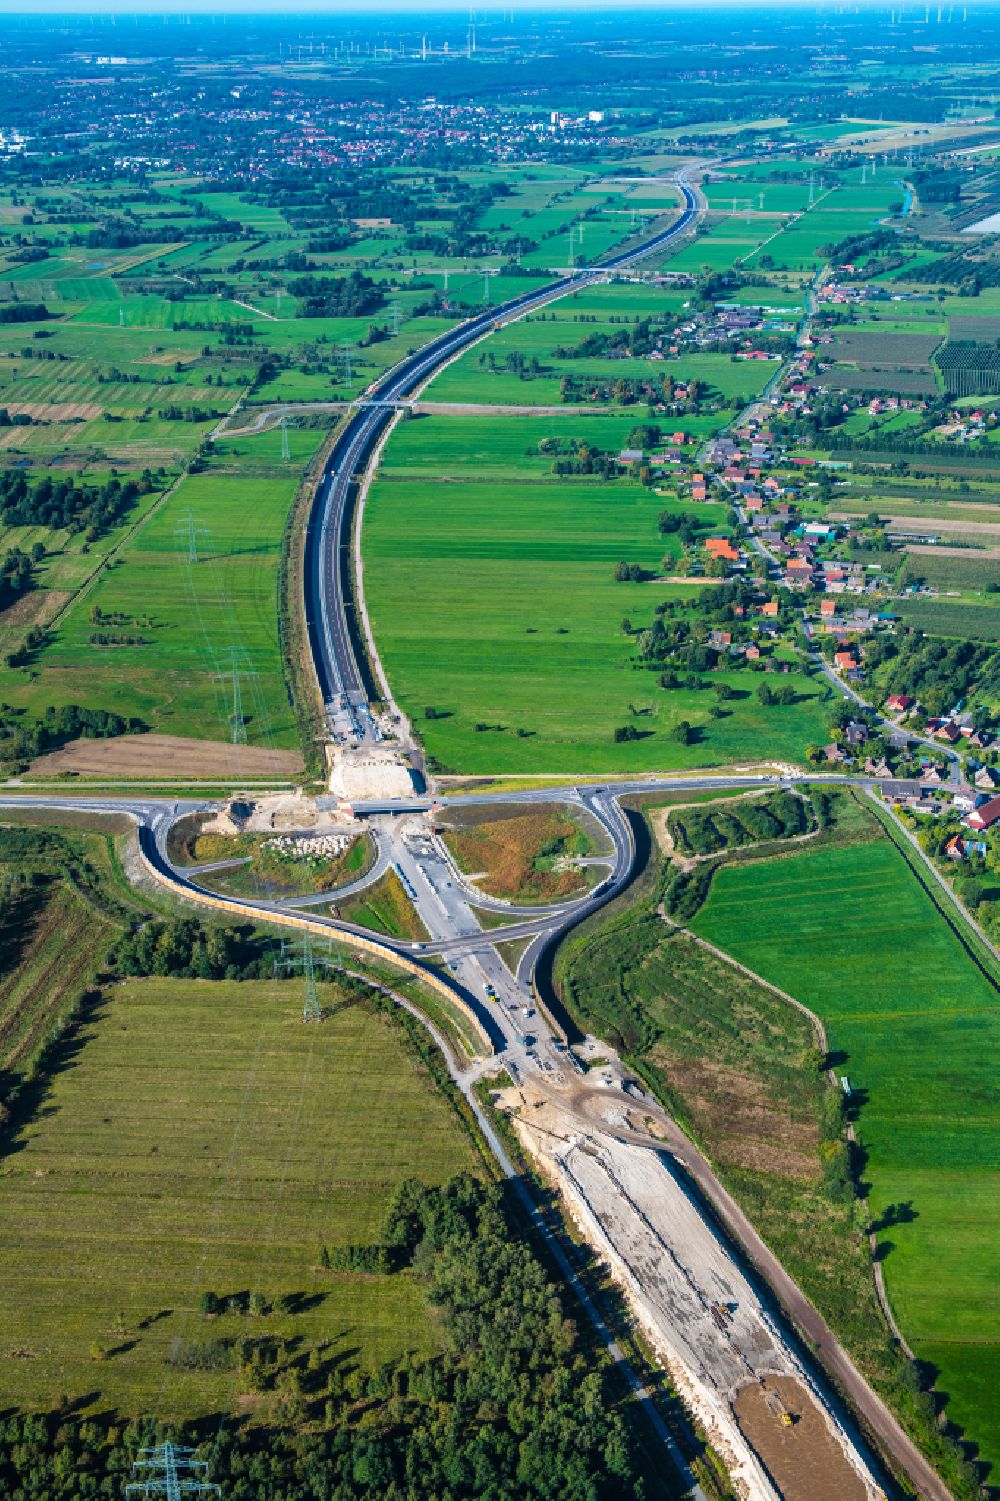 Aerial photograph Neu Wulmstorf - Construction site for new construction on the motorway route of the motorway exit A26 in Neu Wulmstorf in the state of Lower Saxony, Germany